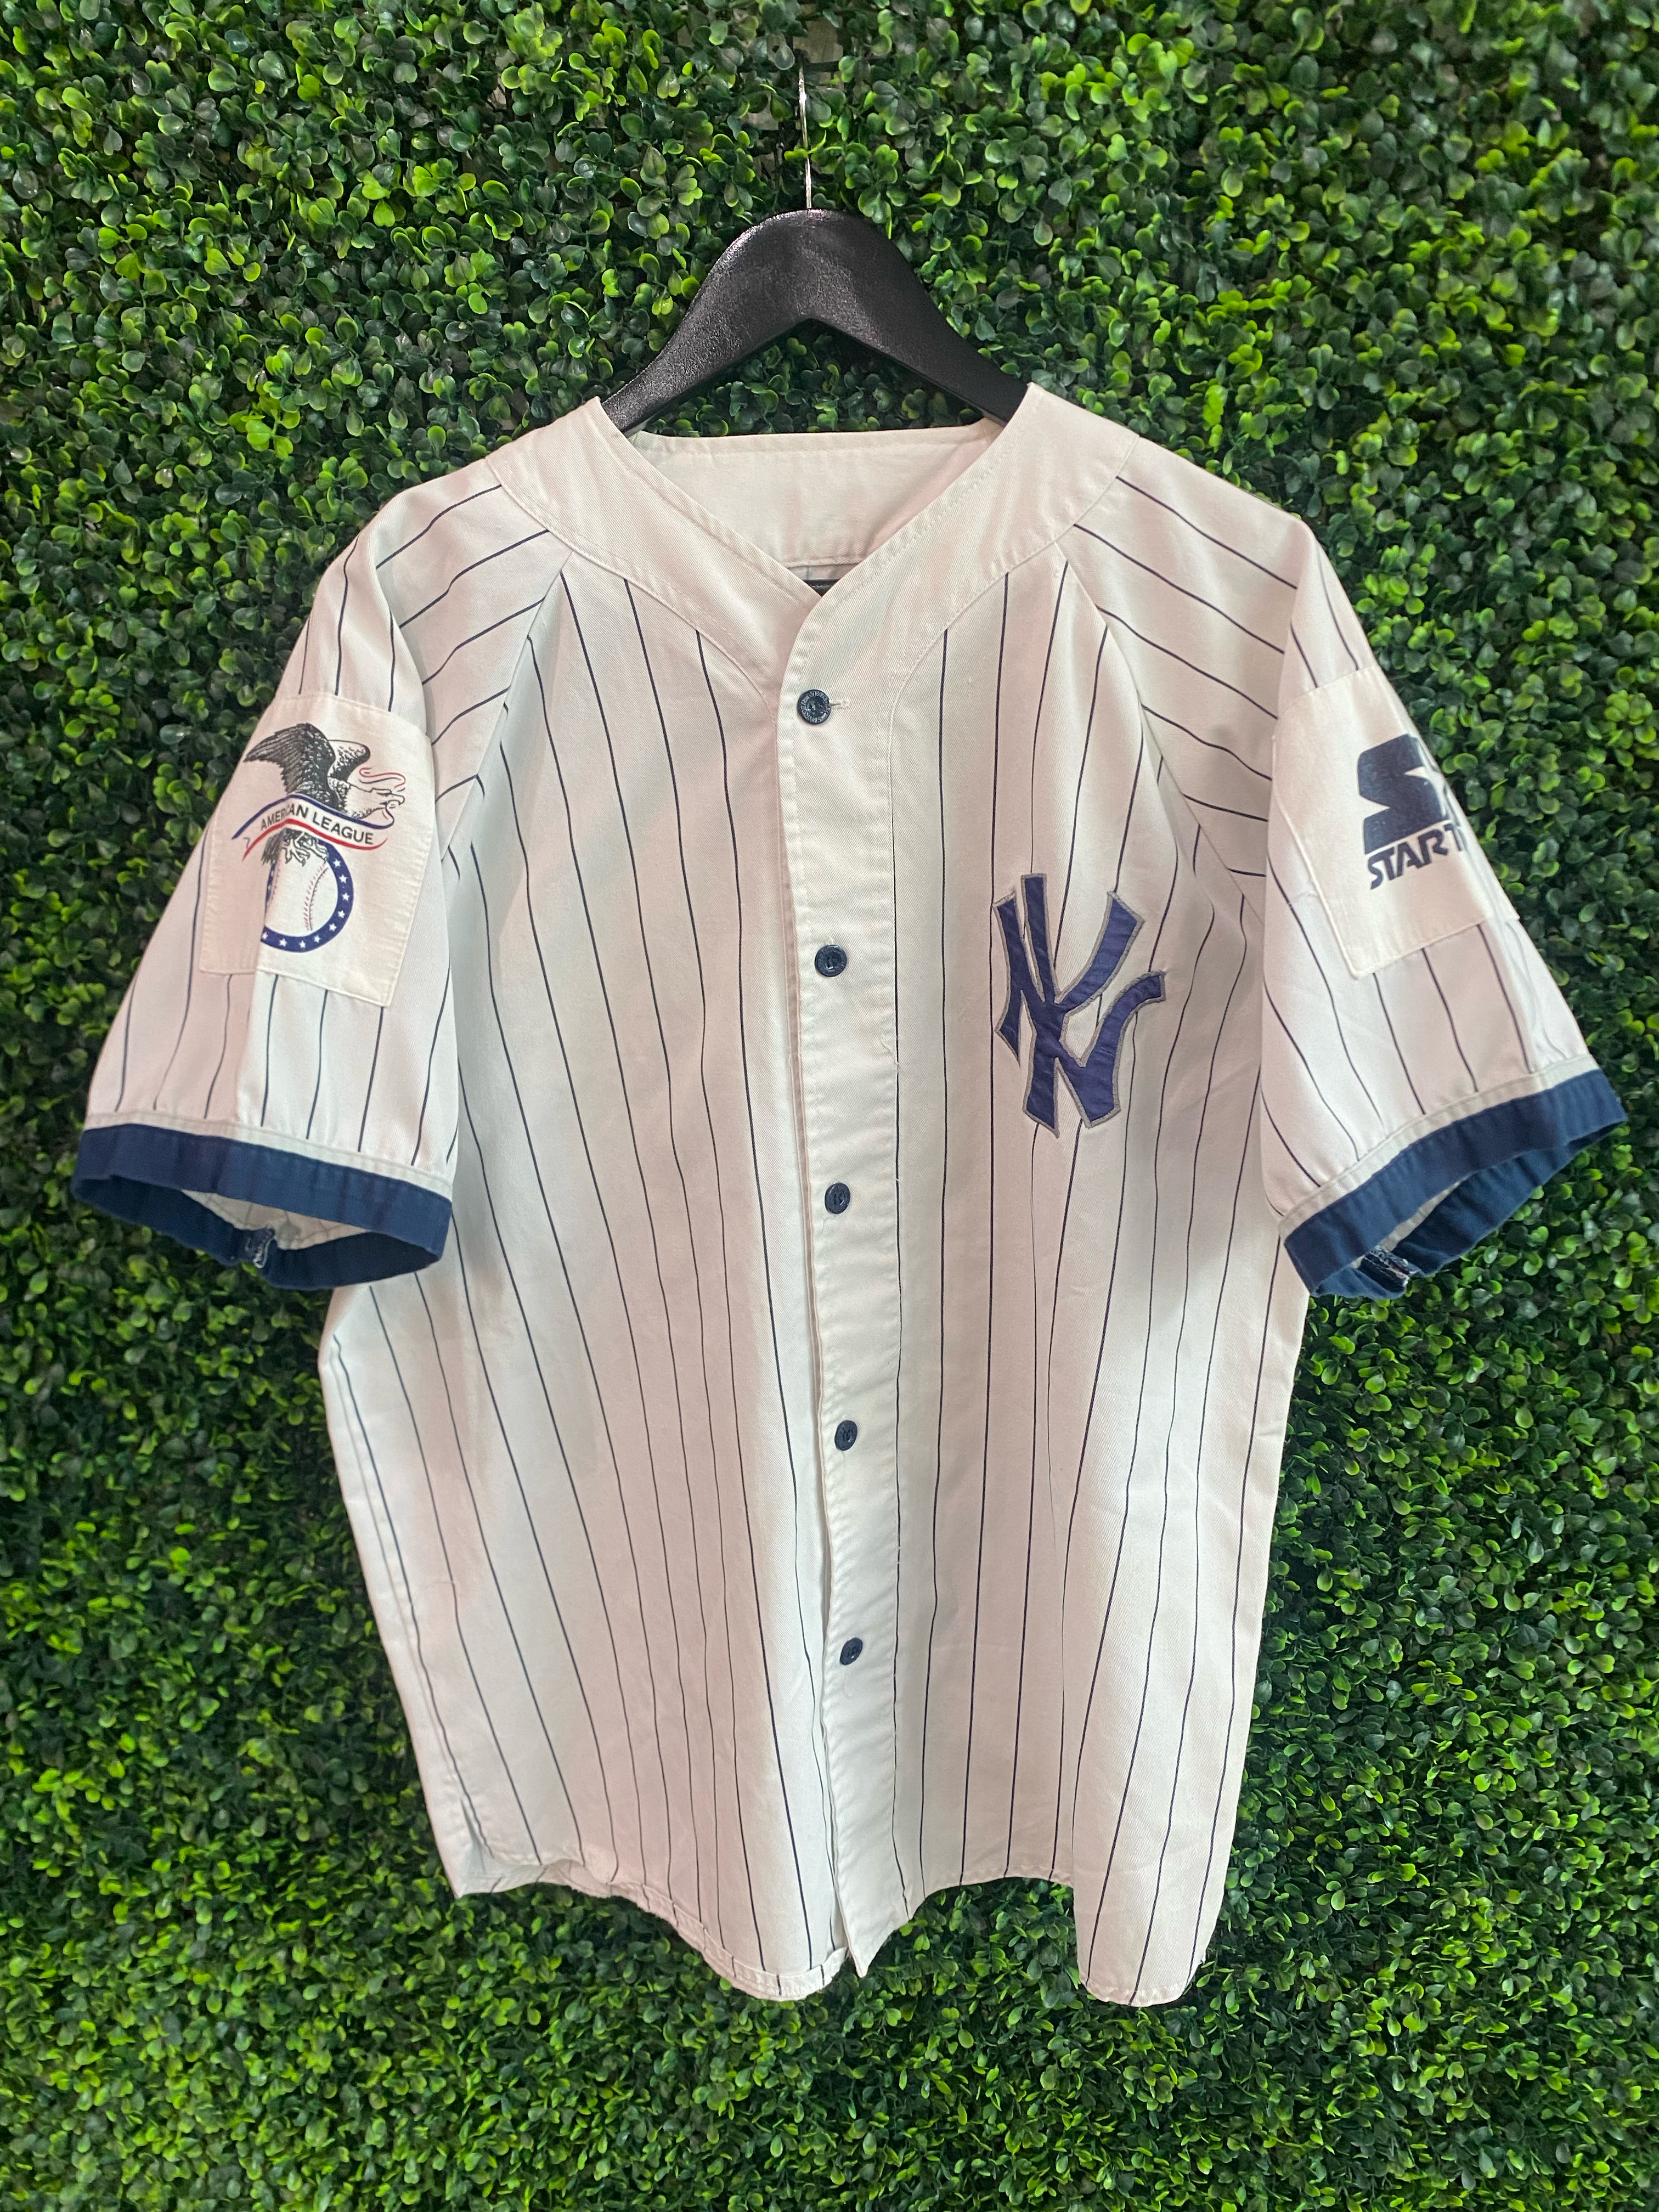 90s NY Yankees Starter Pin Striped Jersey XL - 5 Star Vintage